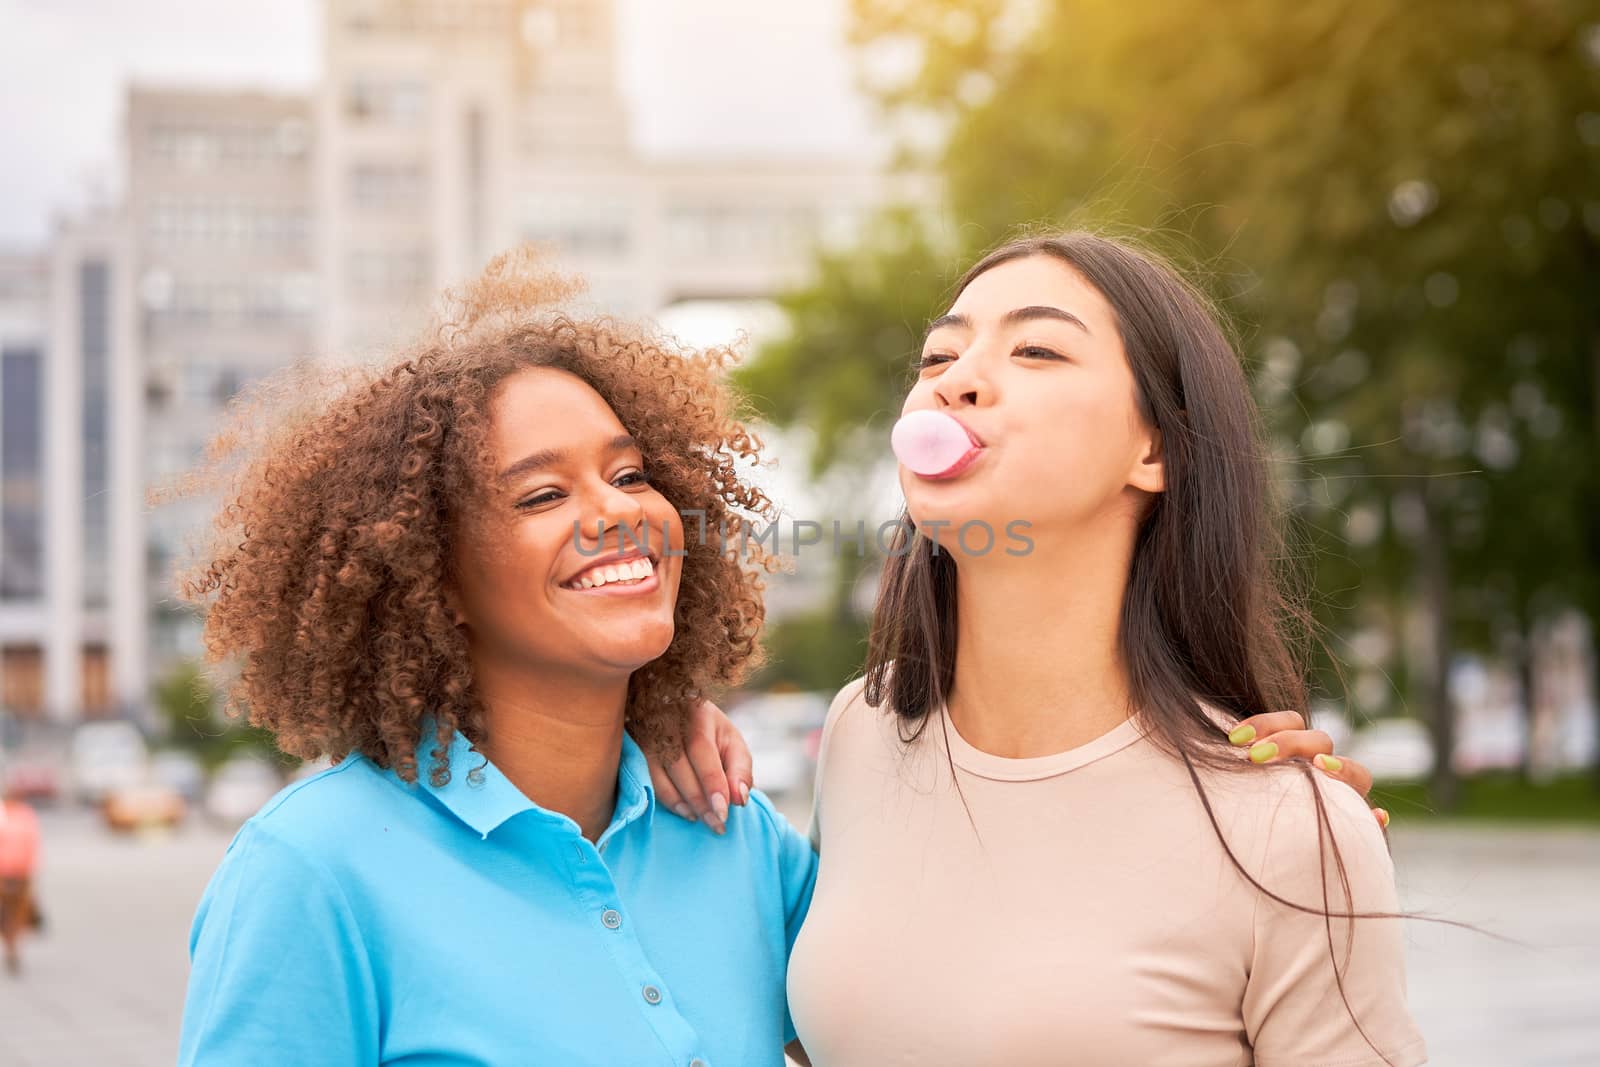 African american woman laughing while asian friend inflating bubble gum. Closeup face of multiethnic friends enjoying outdoor street. Girl laughing and blowing chewing gum with friend embracing her